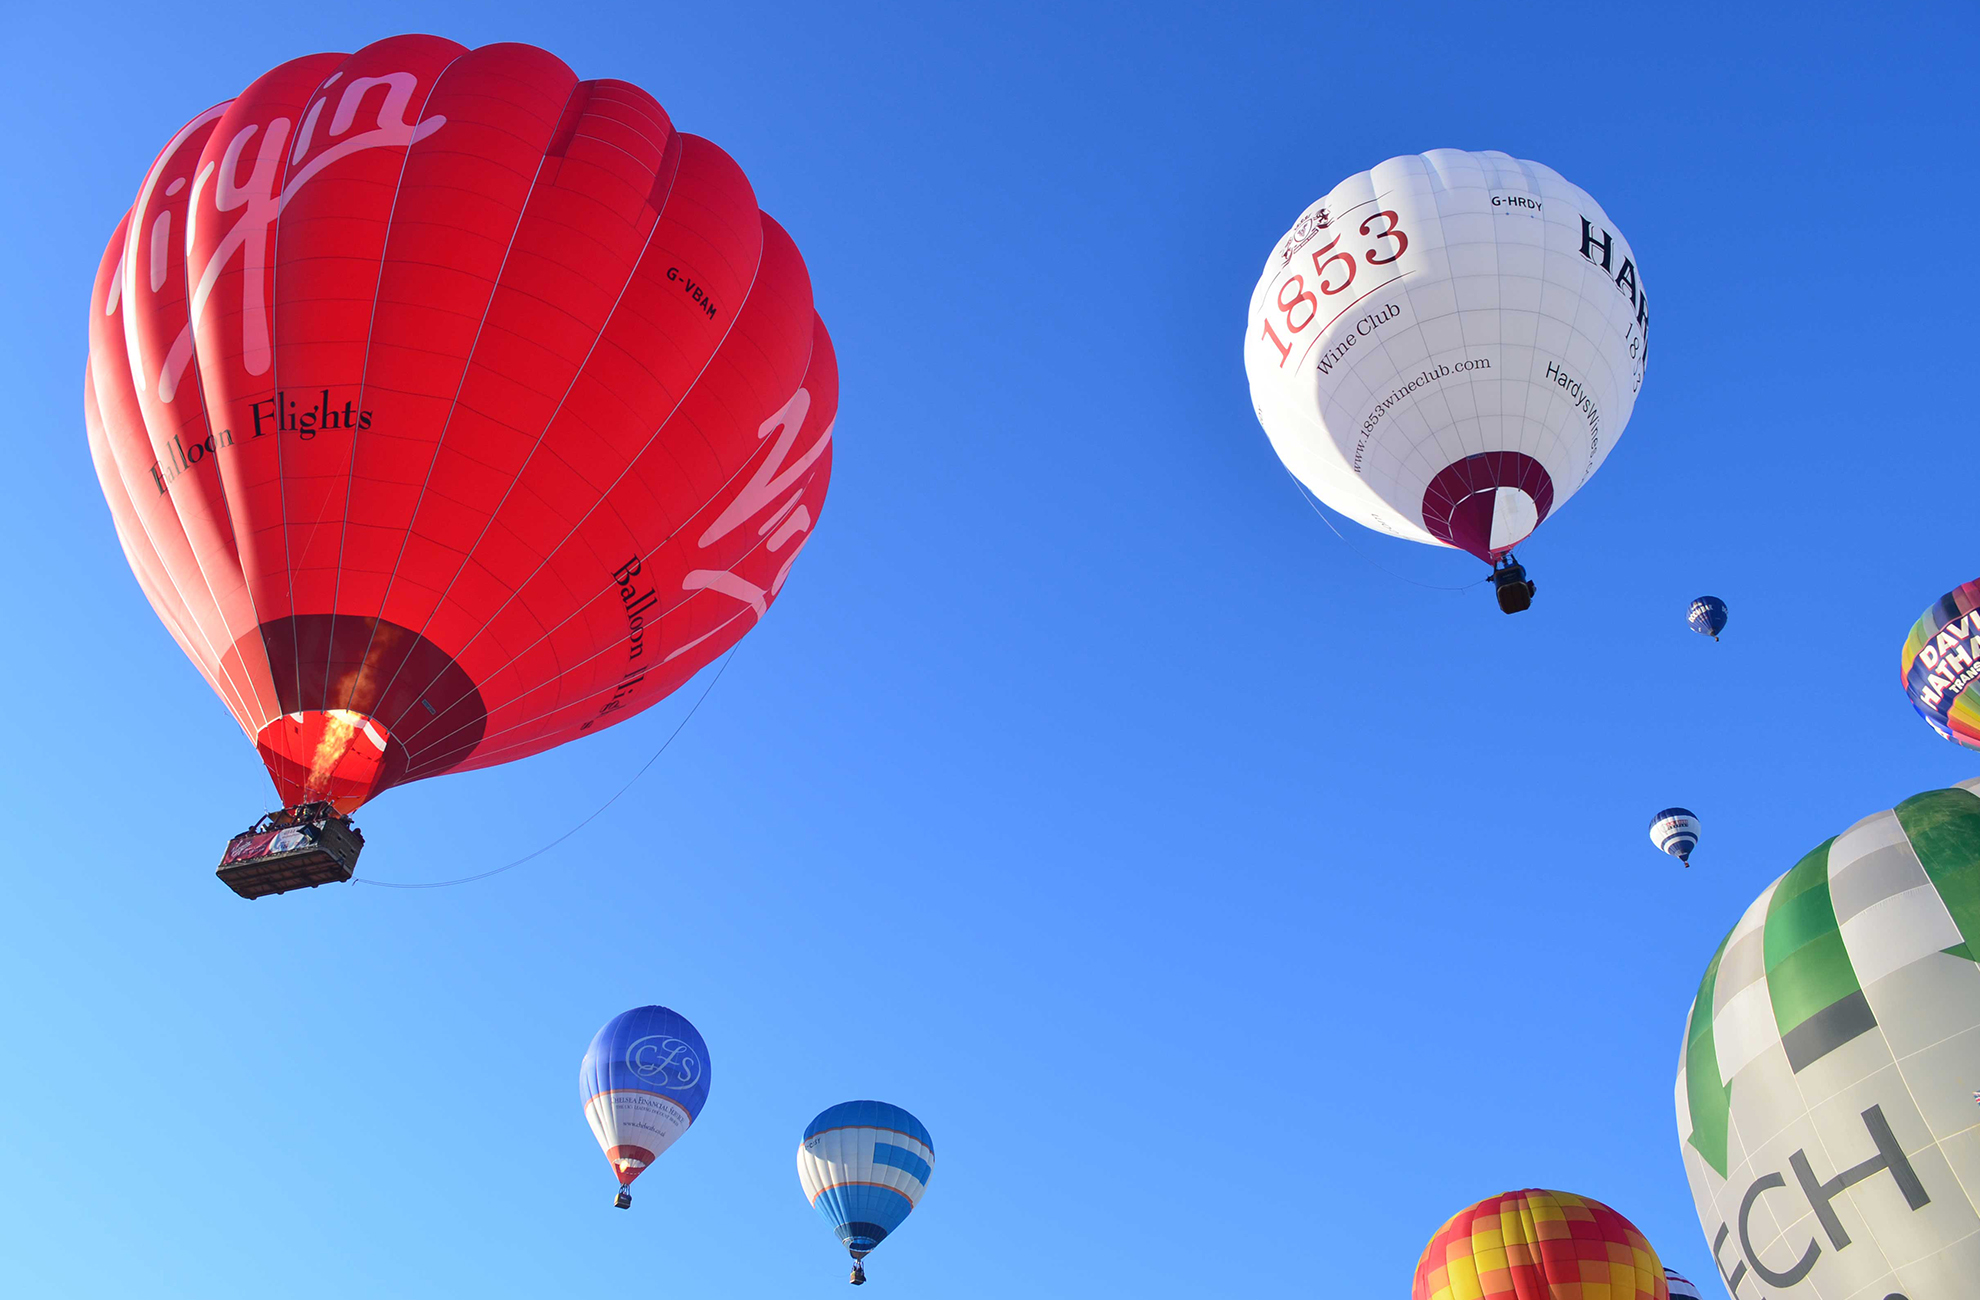 A hot air balloon ride is another one of the great things to do in Cheshire